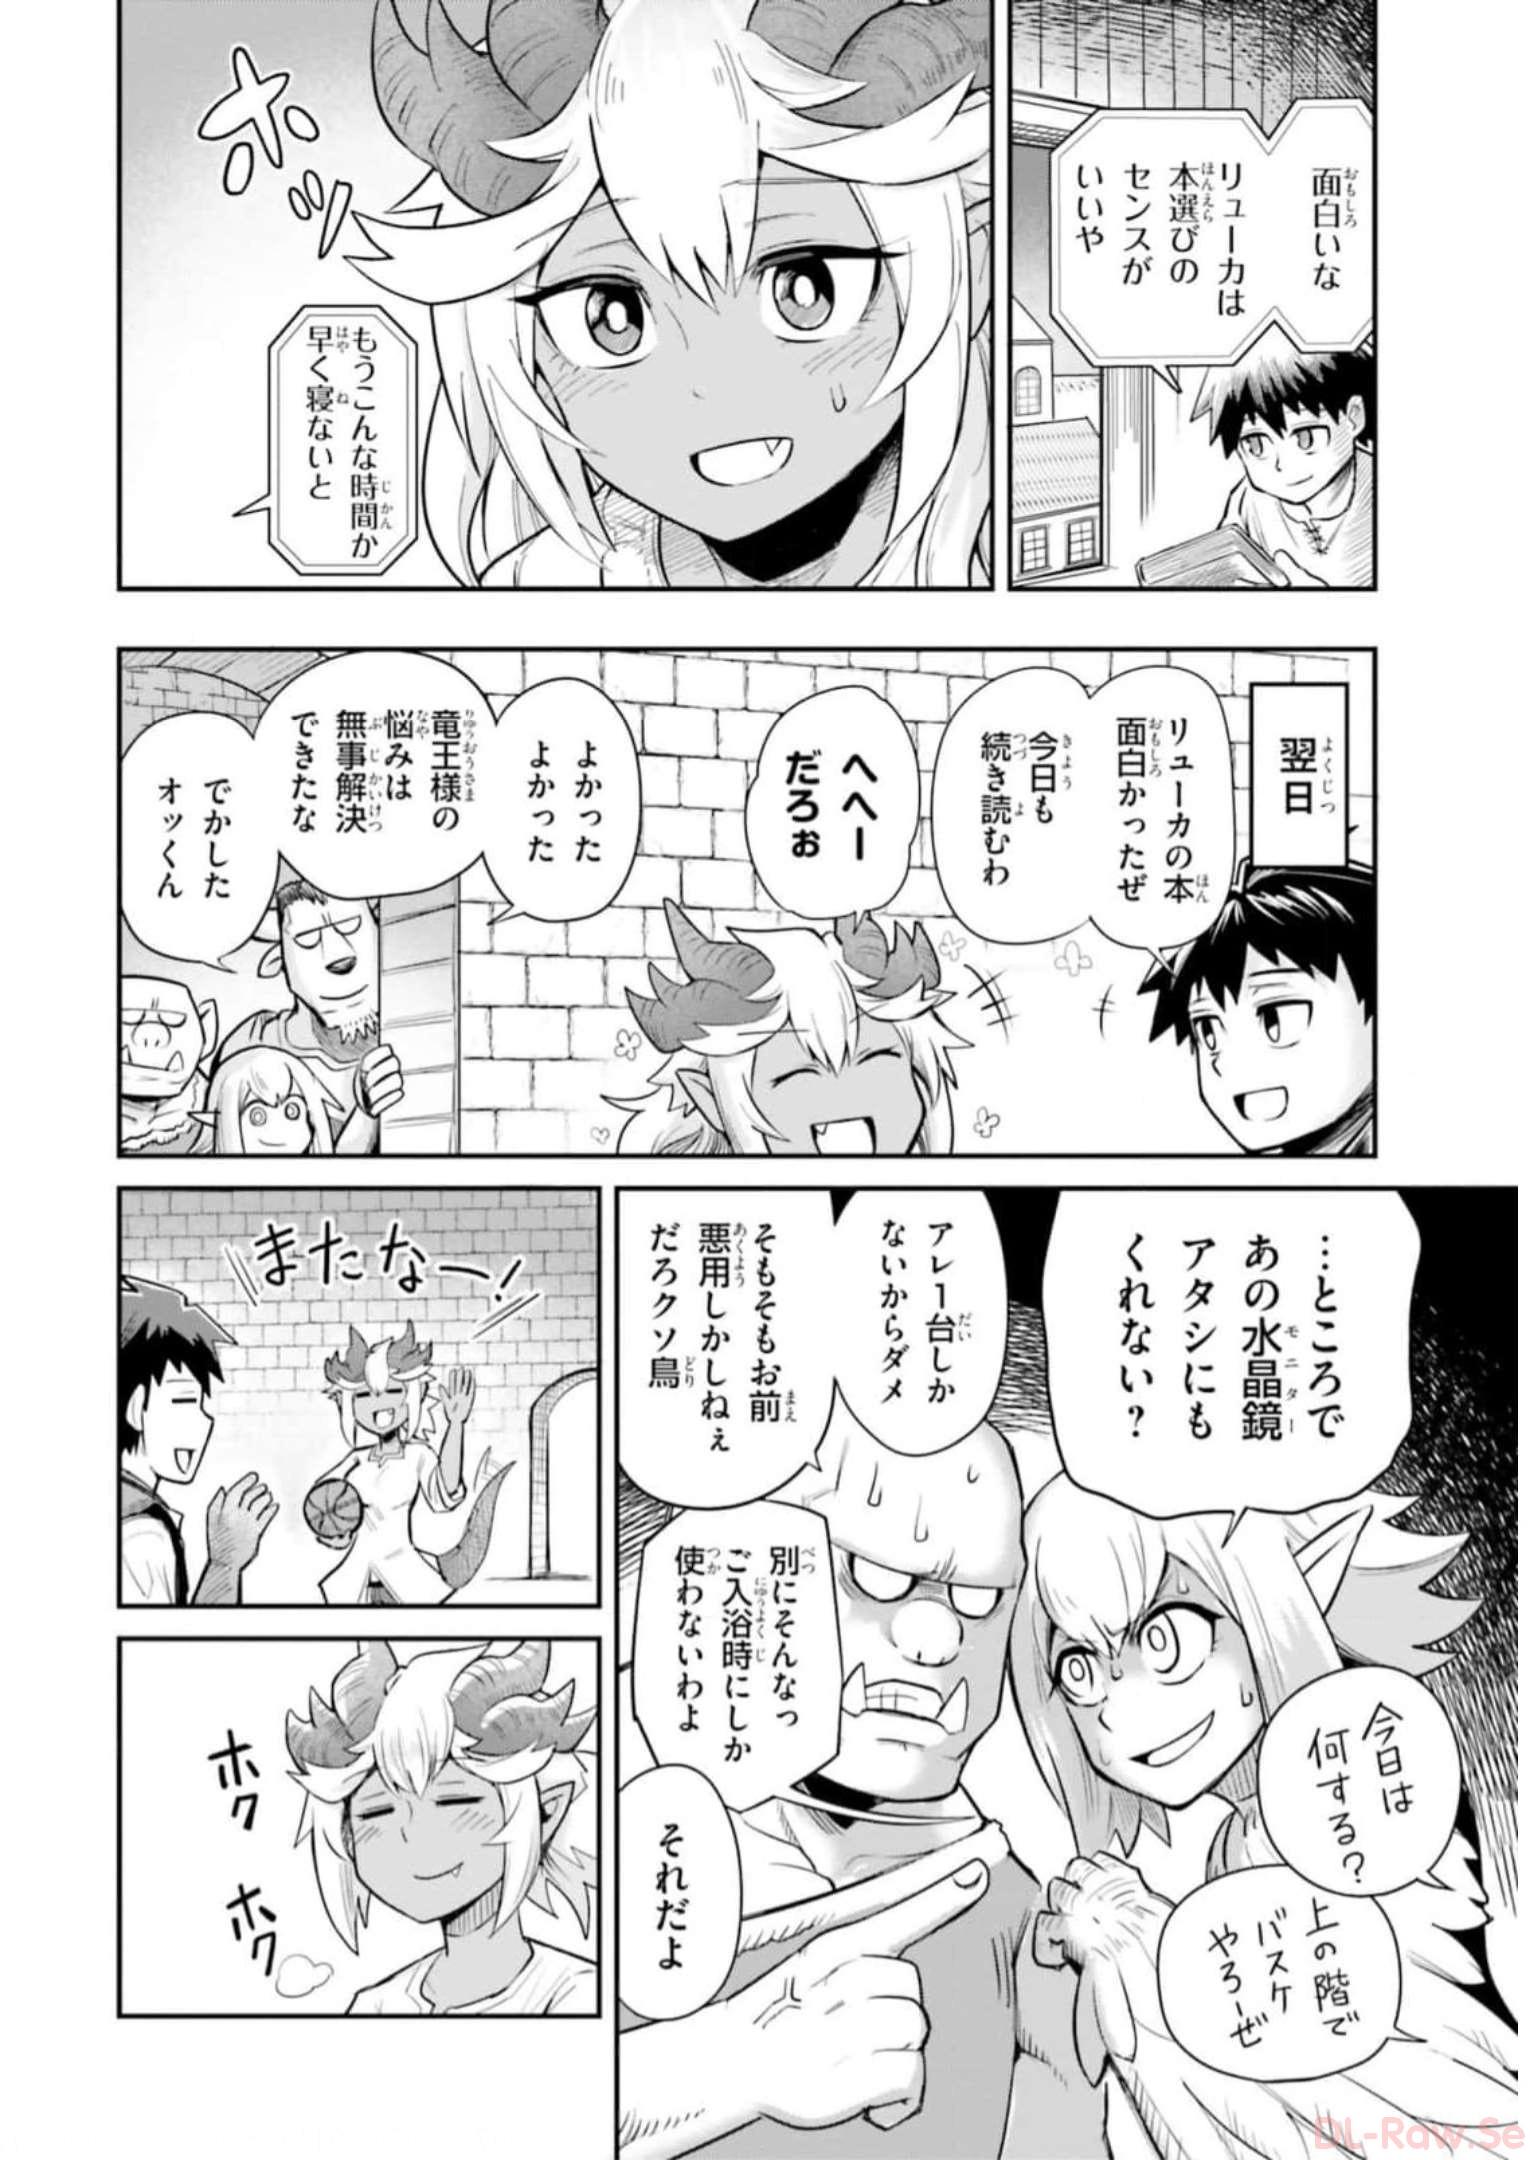 Dungeon Friends Forever Dungeon's Childhood Friend ダンジョンの幼なじみ 第4話 - Page 6